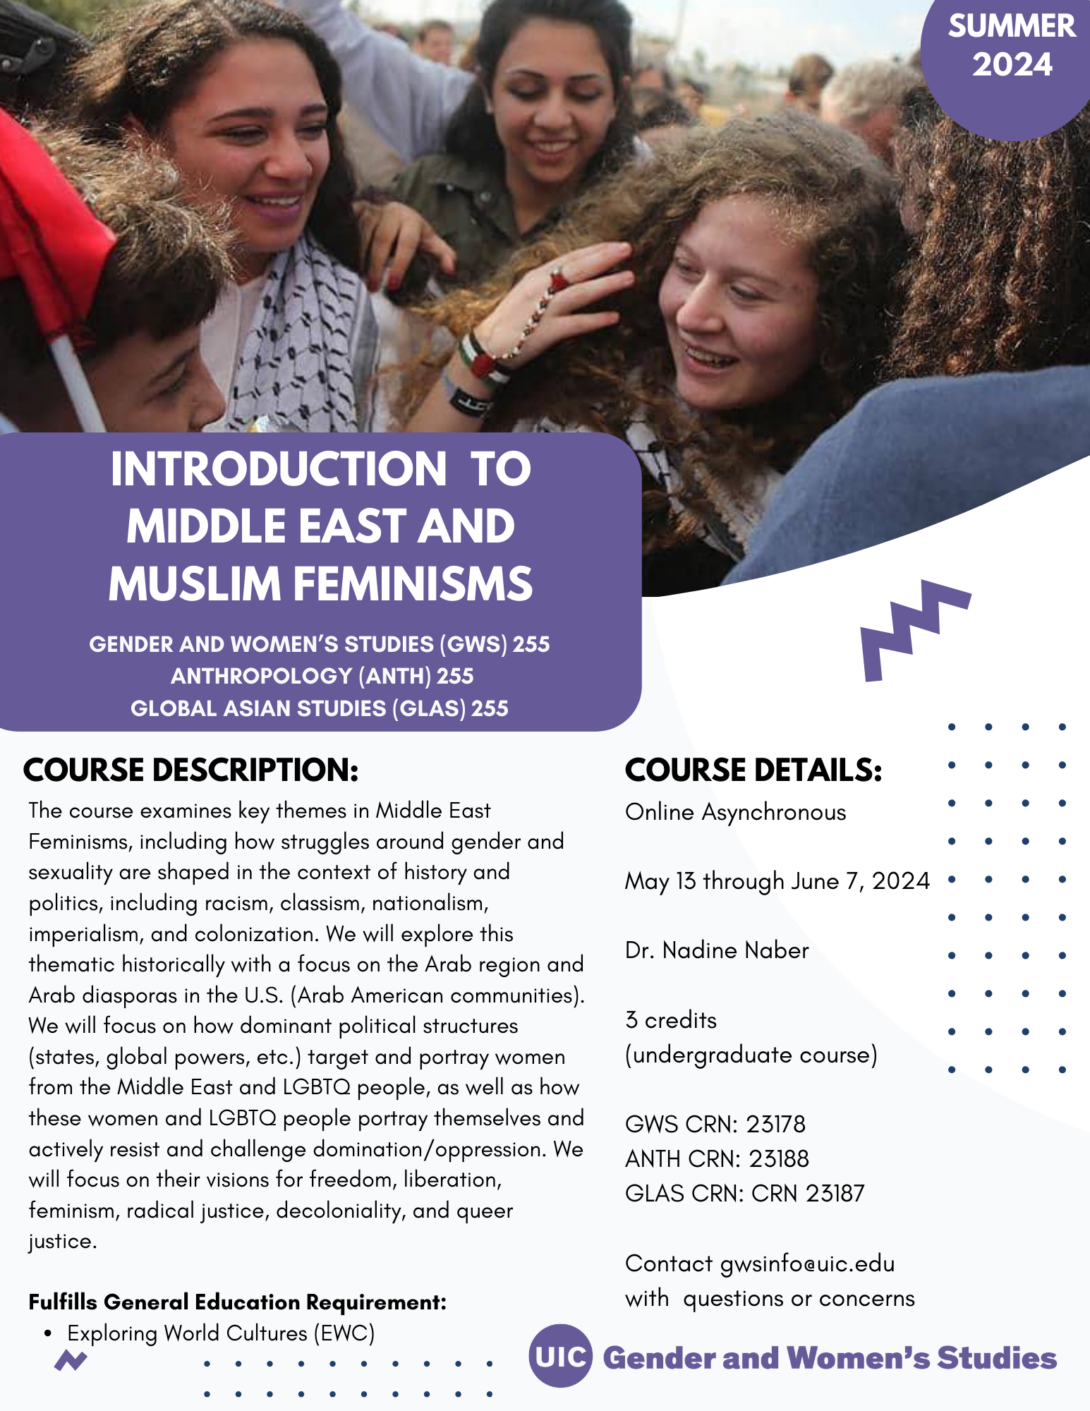 A flyer promoting the summer 2024 Introduction to Middle East and Muslim Feminisms course. The top portion of the flyer includes a photo of Palestinian activist Ahed Tamimi surrounded by people. In the top right corner is a purple circle with Summer 2024 inside it in white text. The bottom left portion of the photo is covered with a purple block that includes the course title in white text. Below that is the course description and course details in black text on a white background. A purple GWS logo appears in the bottom right of the flyer. Parallel lines of purple dots and purple geometric designs decorate the page.